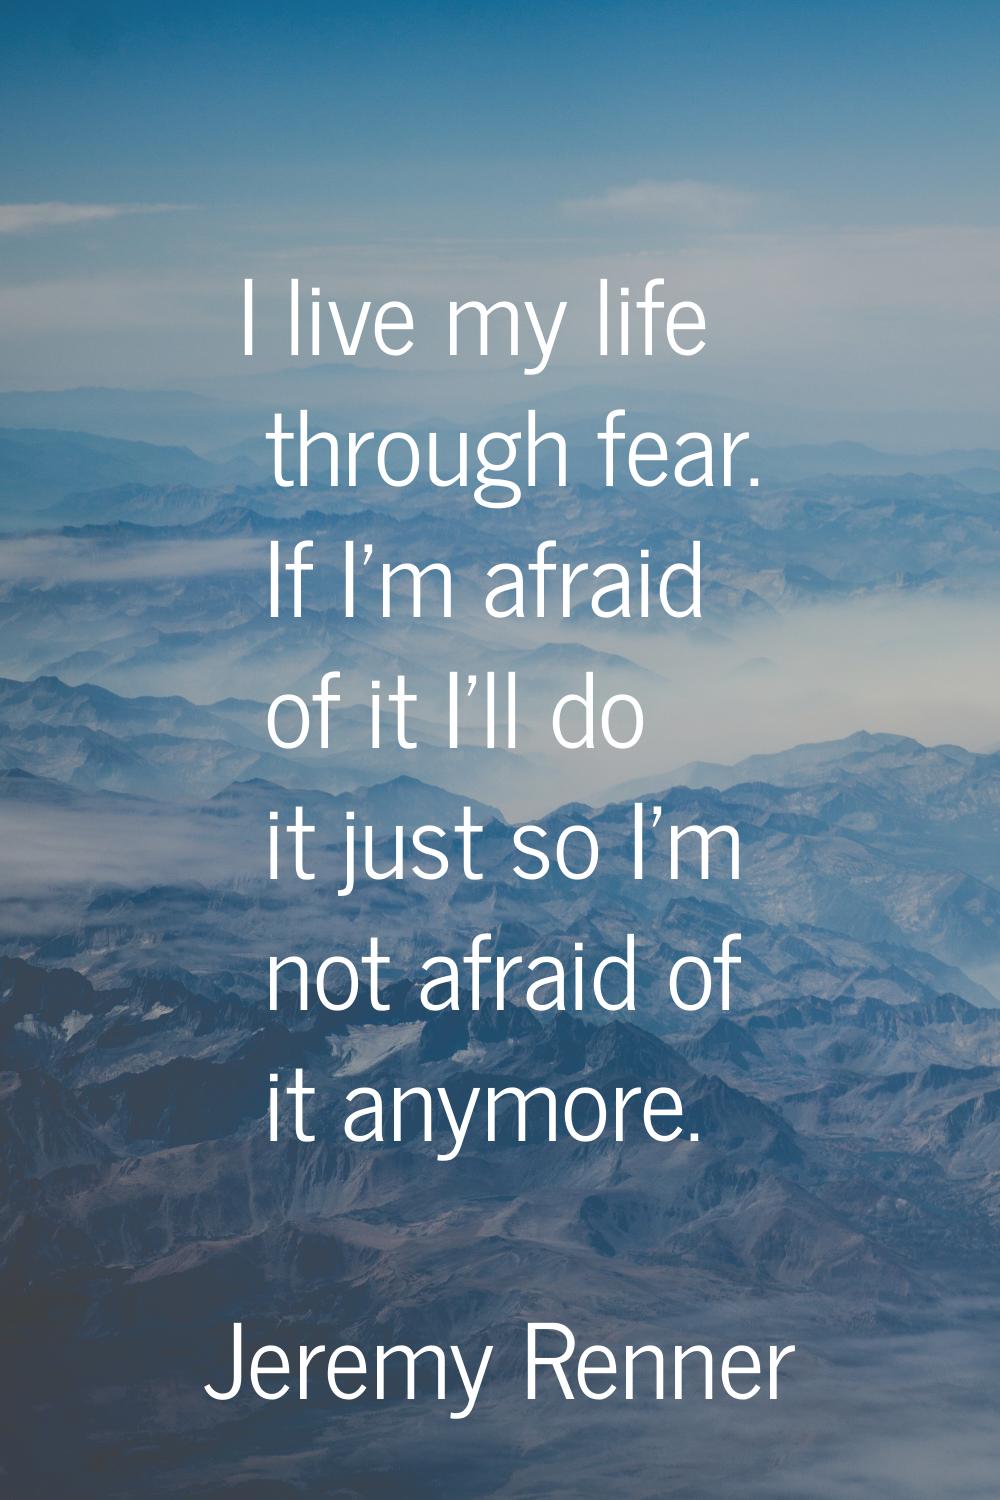 I live my life through fear. If I'm afraid of it I'll do it just so I'm not afraid of it anymore.